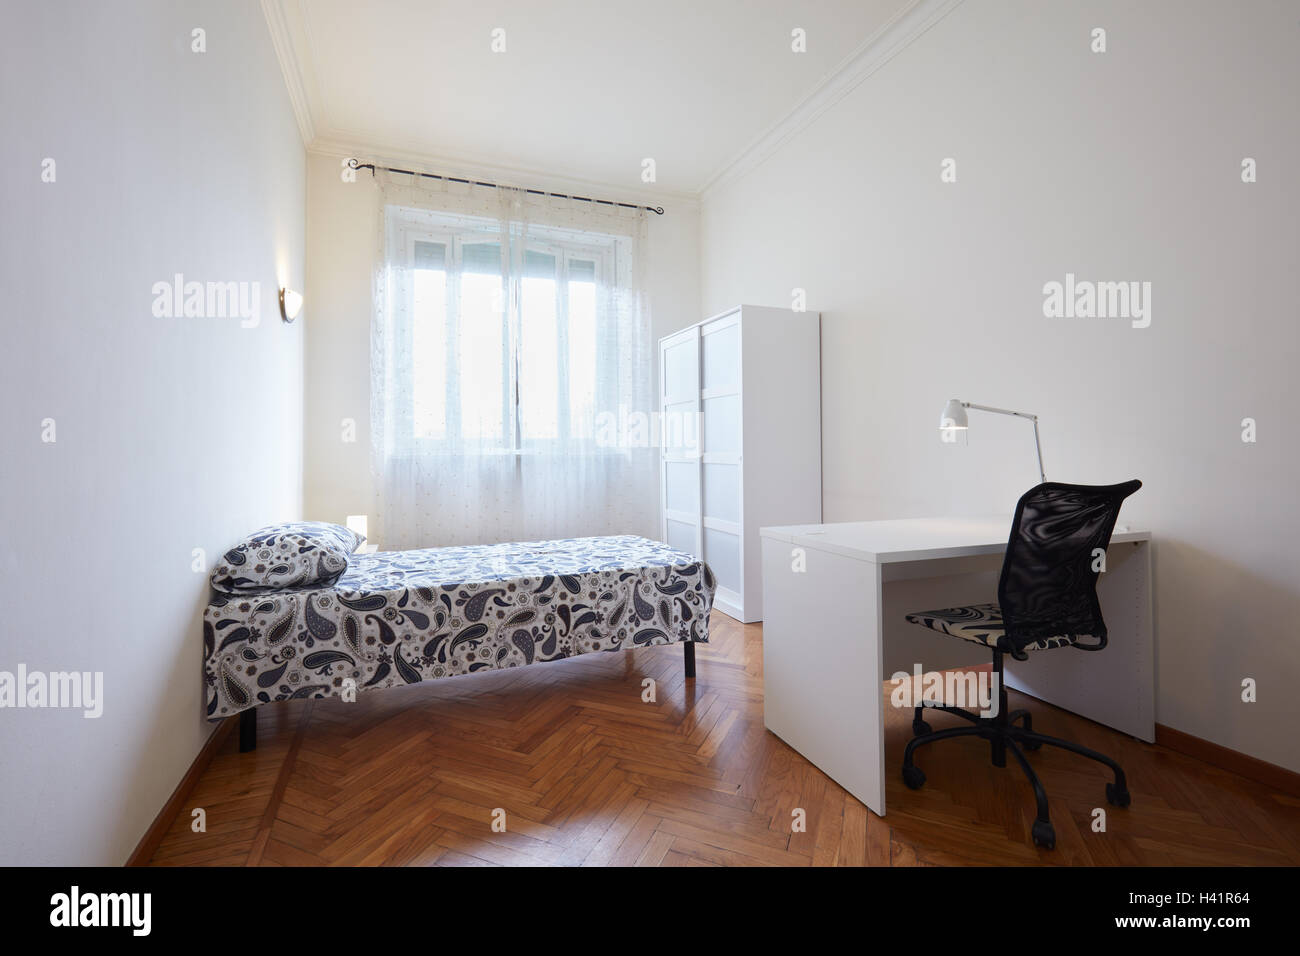 Bedroom interior with single bed in normal apartment Stock Photo